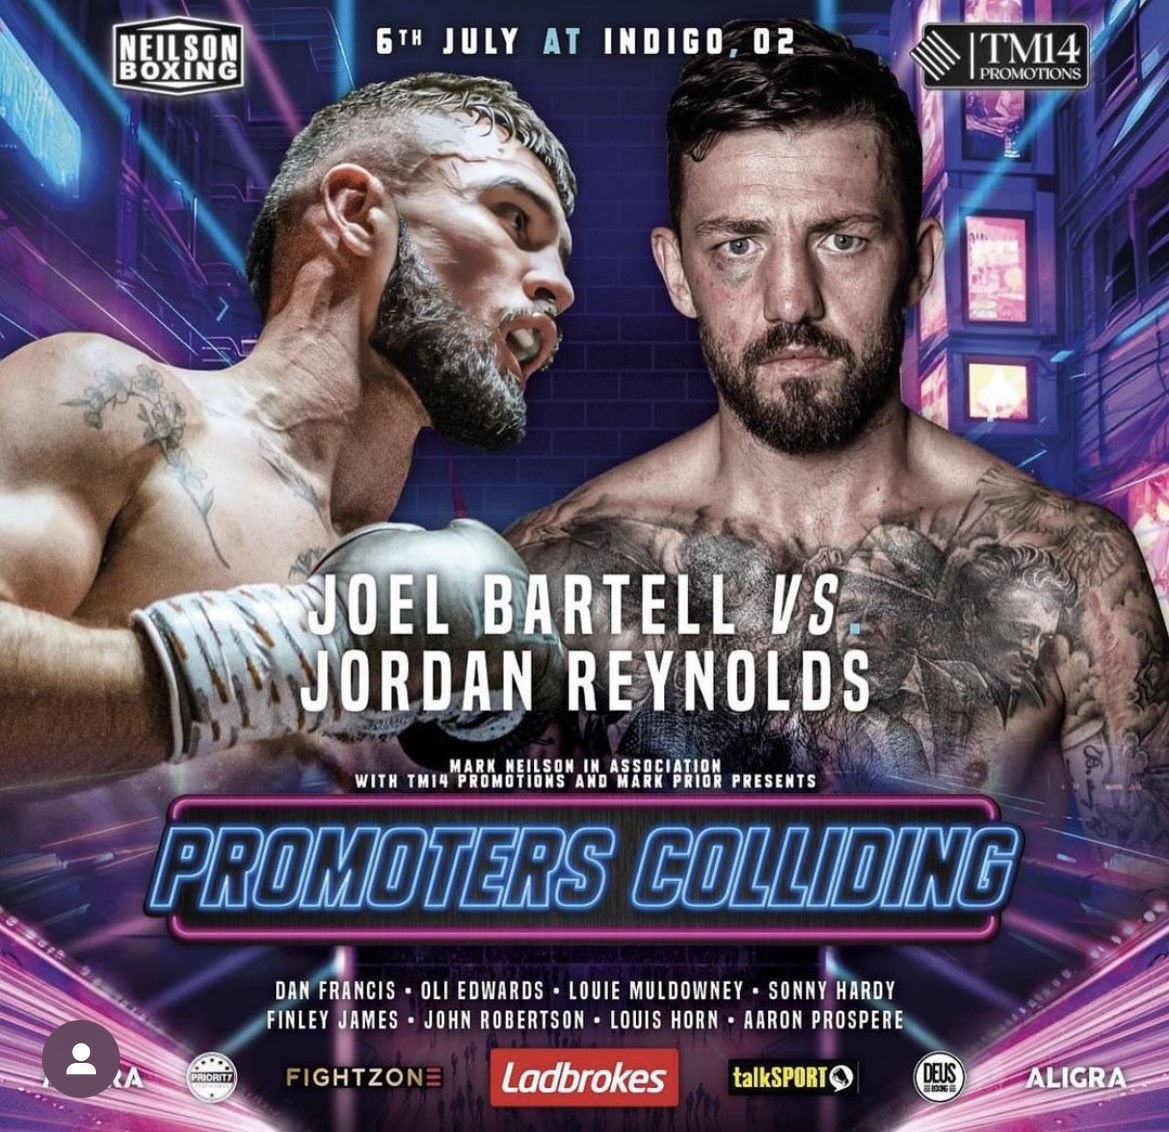 Not in it to mess about, 1 year as a pro now 6-0 💥 Now headlining the O2 indigo in a 10 round final eliminator on the 6th July 🔥Make sure u book off the 6th and fill the place up. Let’s go #BartellsCartel Ticket details soon to come! 🎫@bartell_joel🦁 #6thJuly #O2LondonIndigo